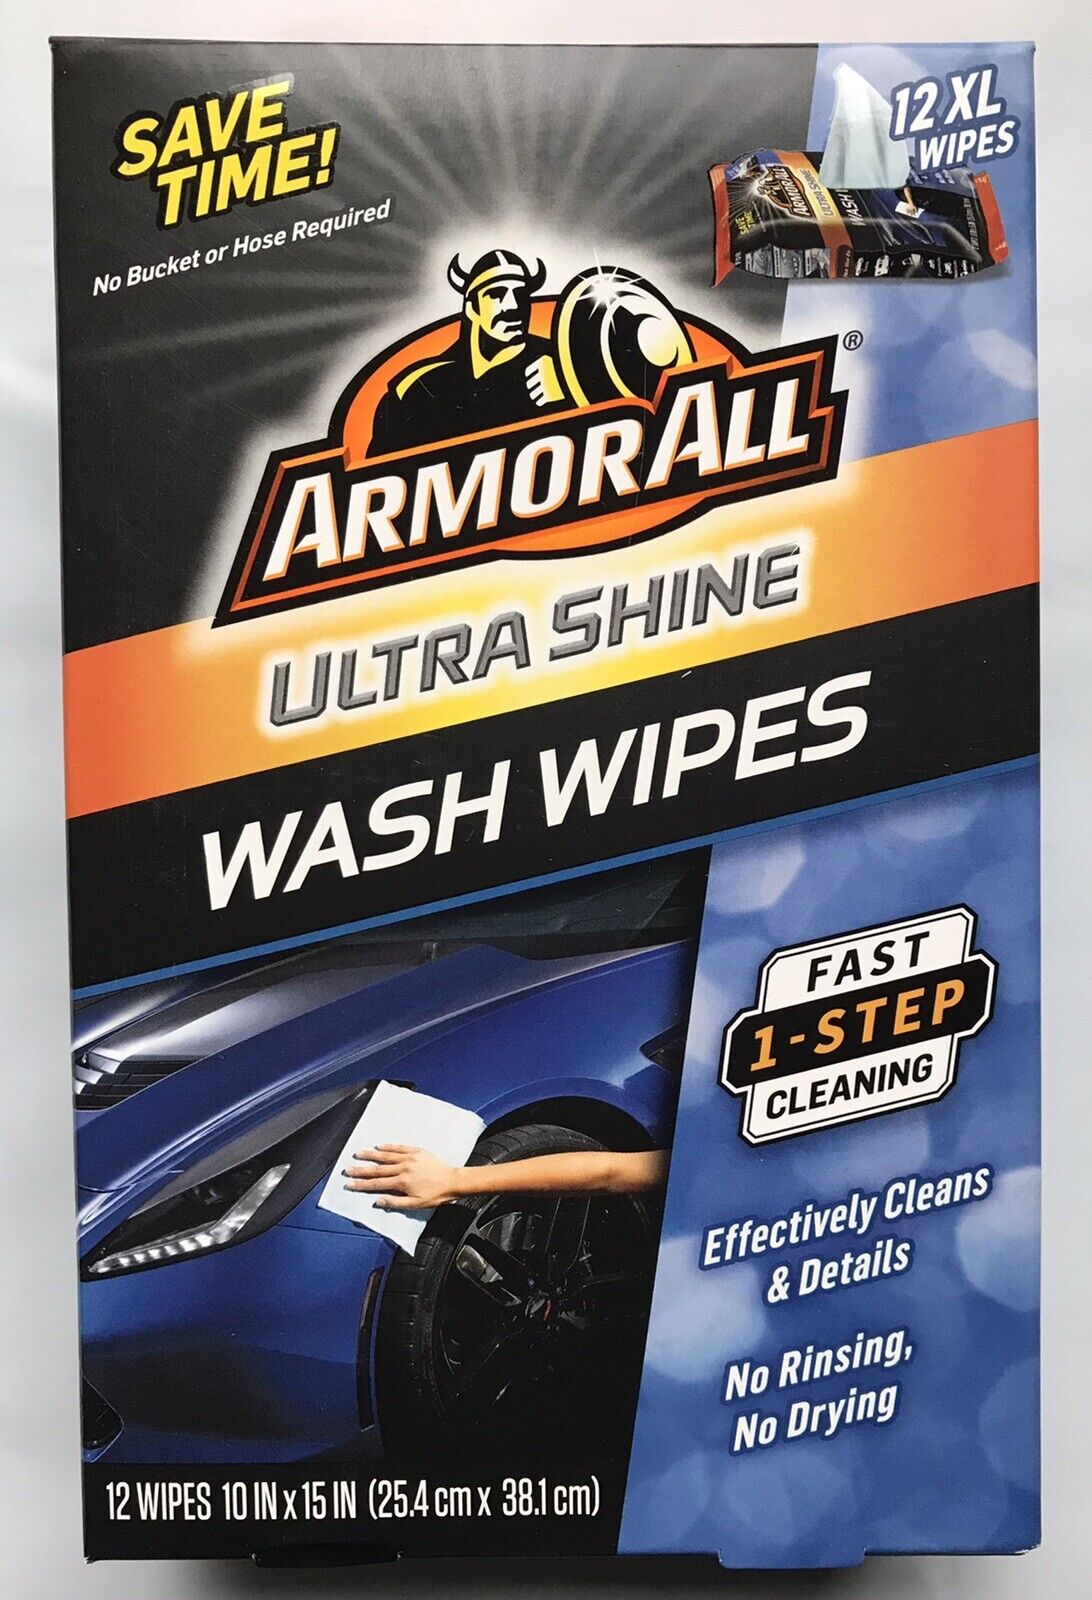 Armor All Ultra Shine 12 Ct Wash Wipes Cleaner Auto Car Truck RV Boat Motorcycle